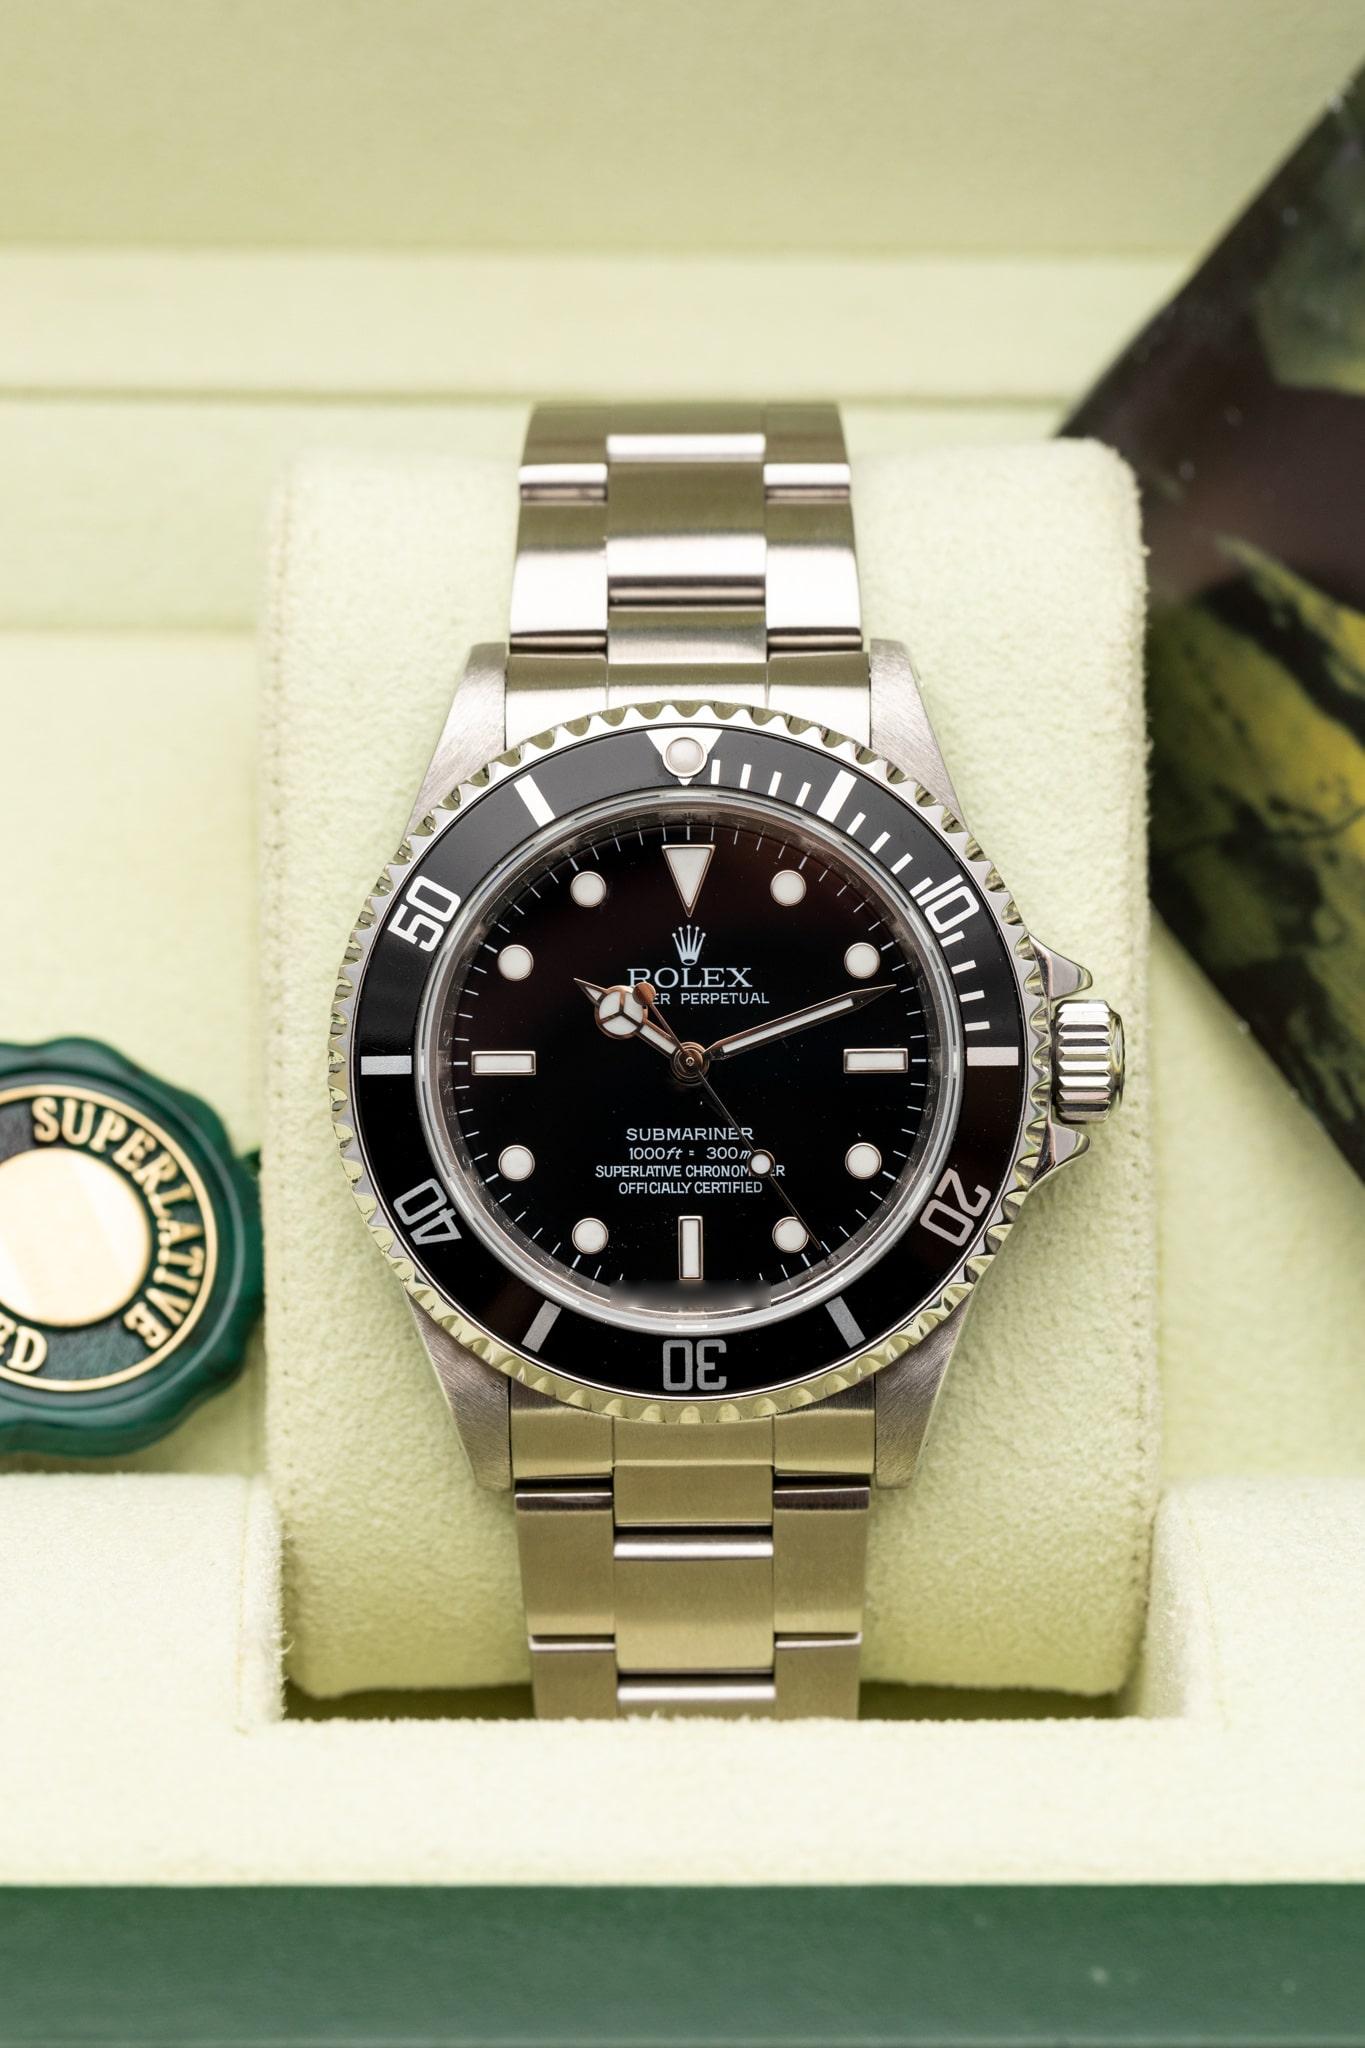 The watch is in a very good condition and it’s working well. The watch comes with the original box, along with an AGS Jewelry warranty card. For more information about delivery, warranty and return, please check our terms&conditions agreement. Rolex